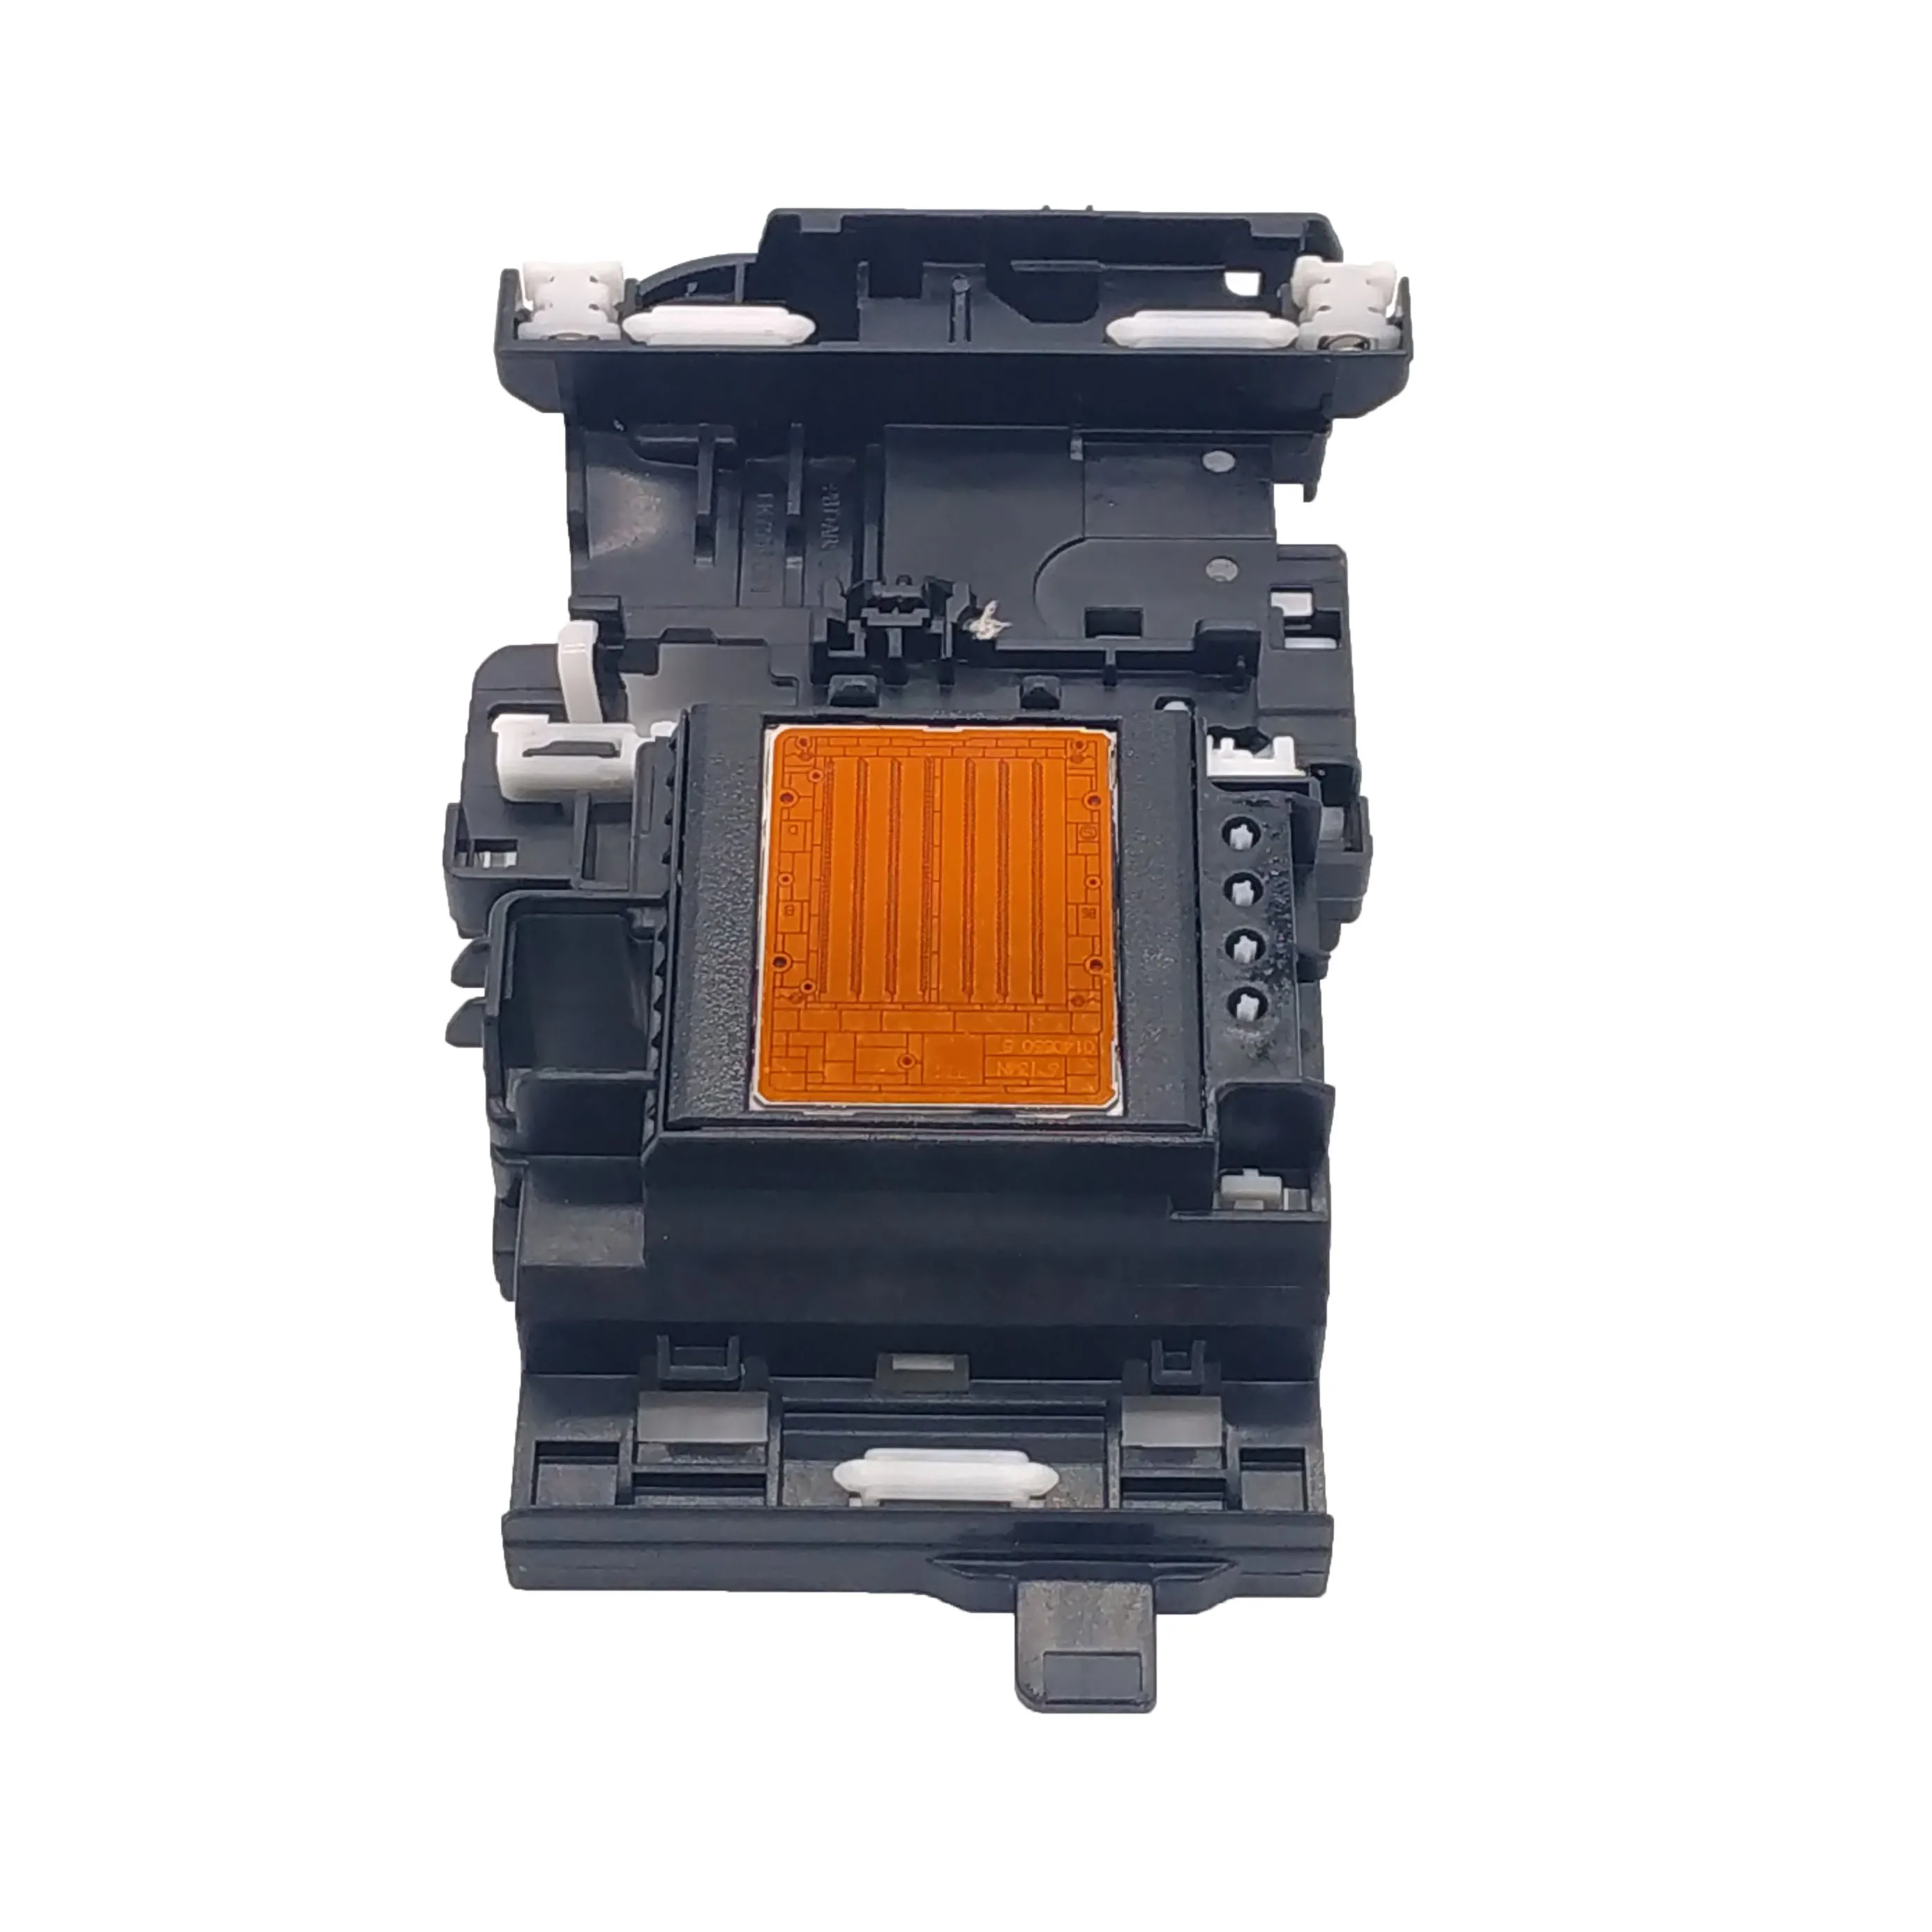 

Print Head DCP-J100 Fits For Brother DCP-J105 MFC-T800W DCP-J132W DCP-J102 DCP-T500W DCP-J100 DCP-T300 DCP-T700W MFC-J200 J205